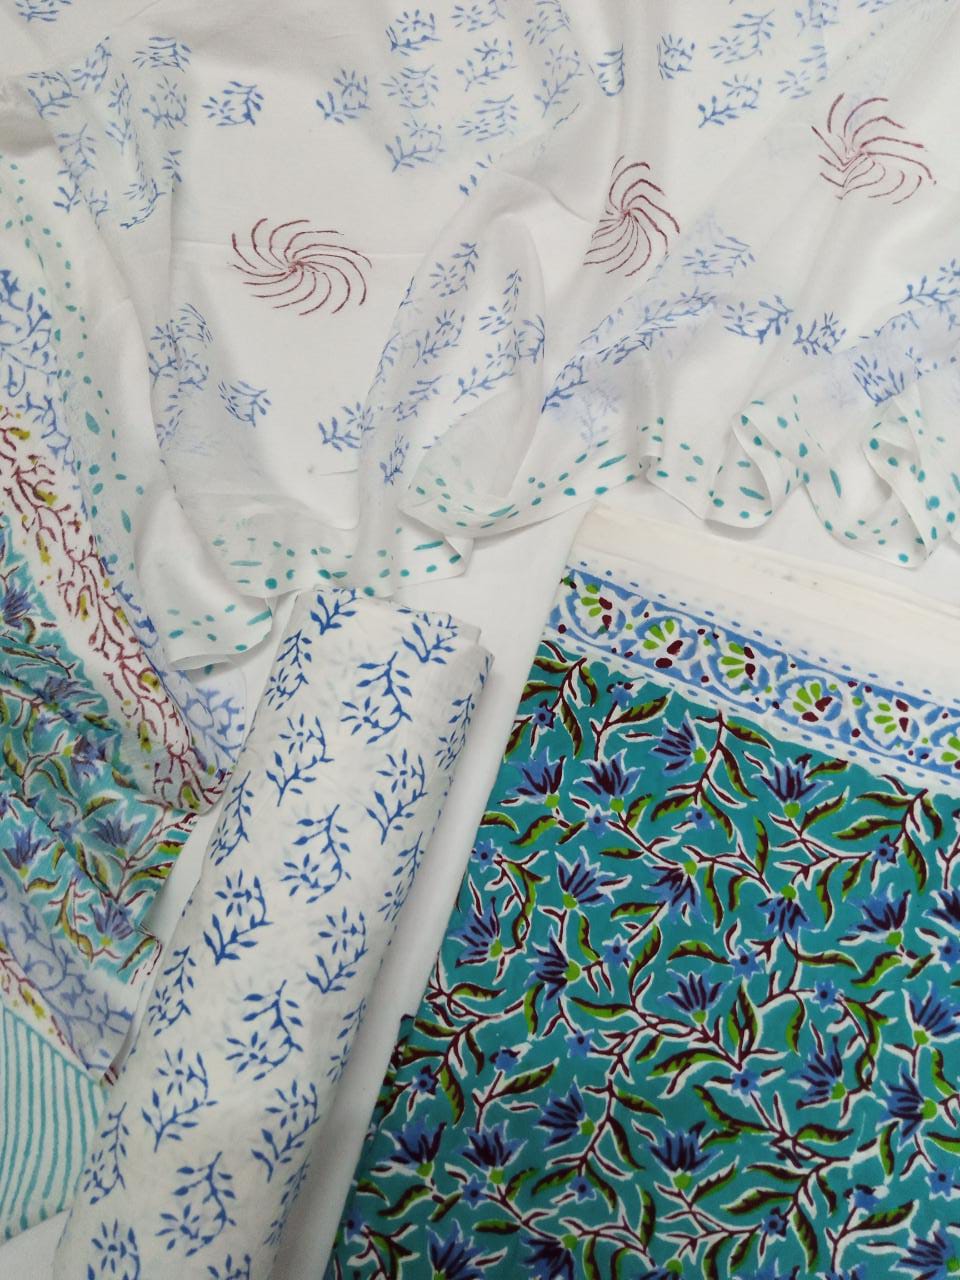 Sea Green with Blue Florals Hand Block Printed Pure Cotton Unstitched Salwar Suit with Chiffon Dupatta - JB34